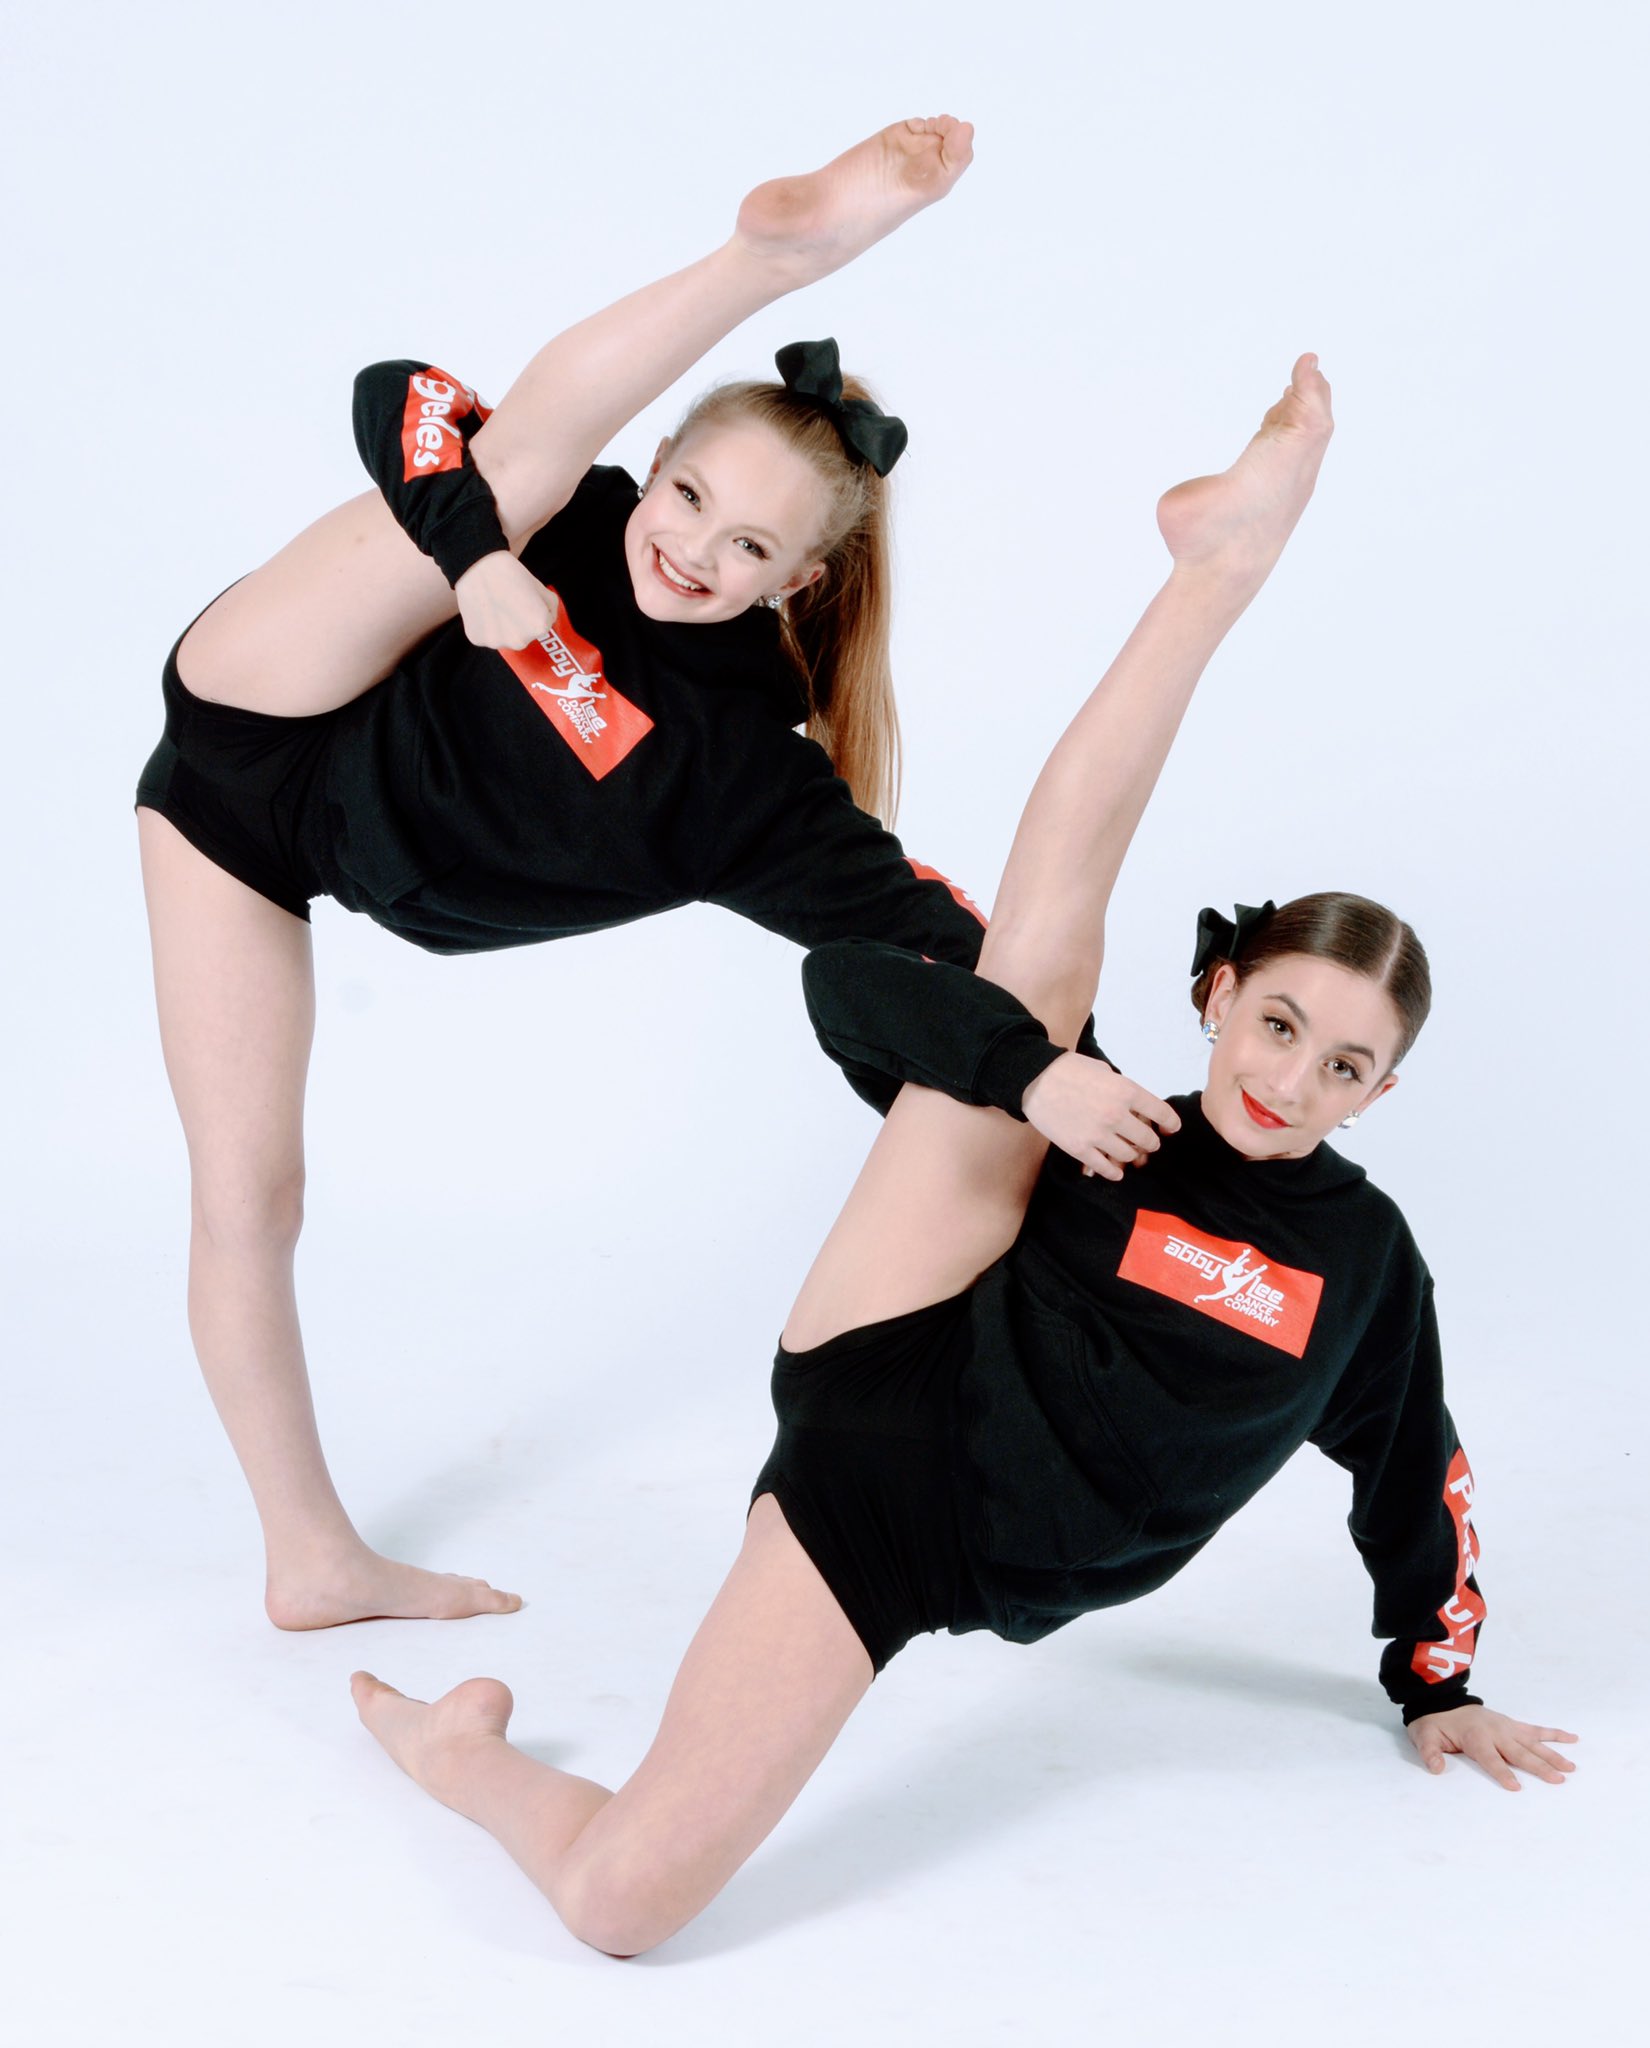 Abby Lee Dance Company - See Schedules, Reviews & More